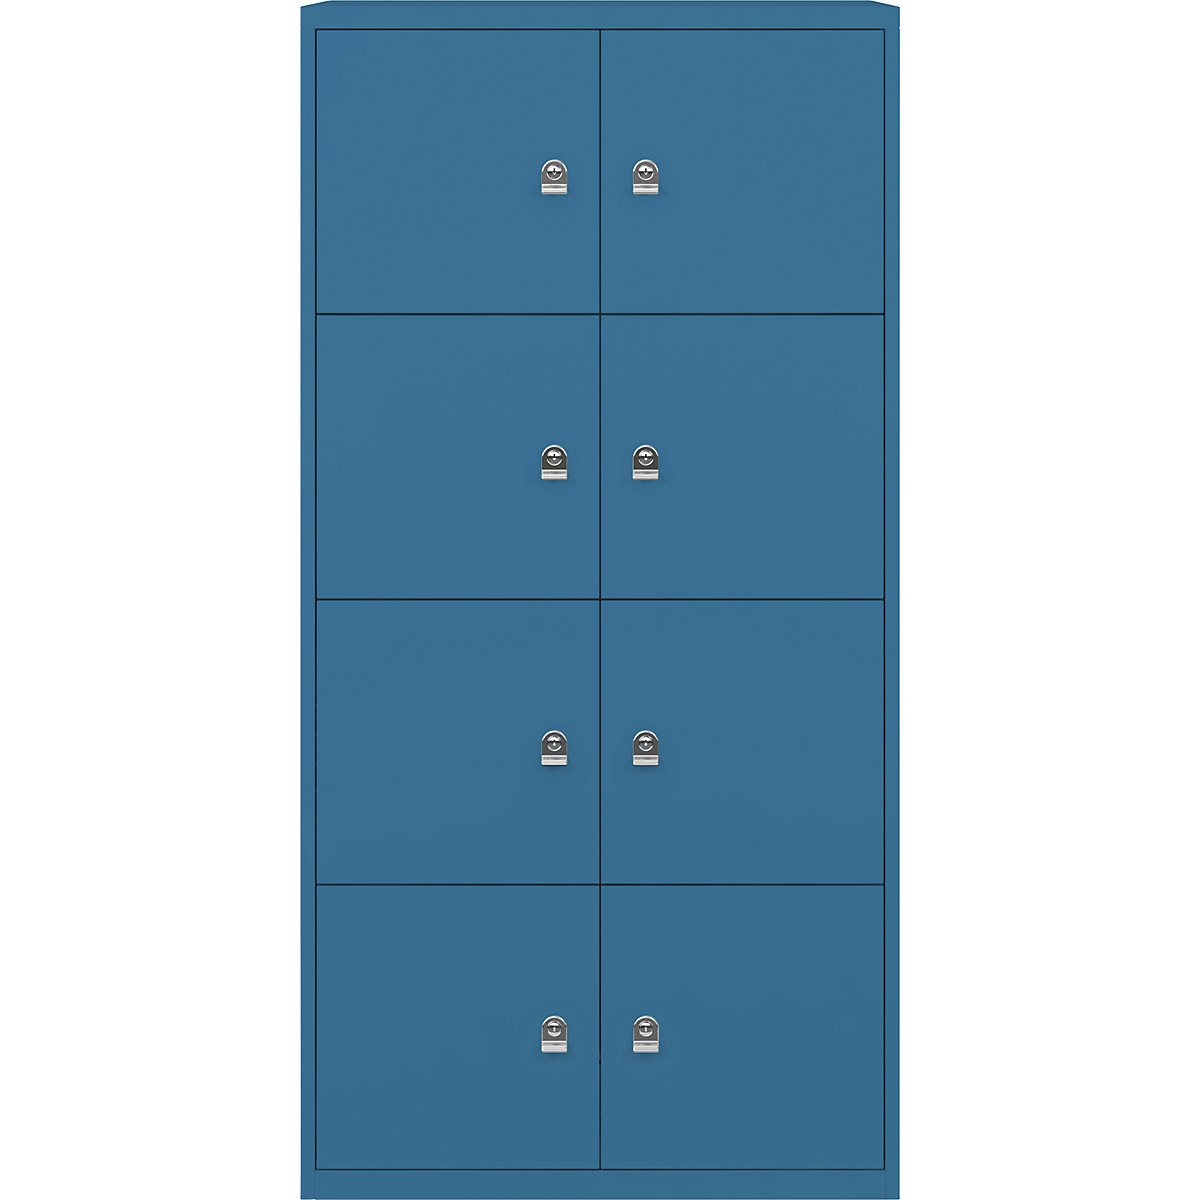 BISLEY – LateralFile™ lodge, with 8 lockable compartments, height 375 mm each, azure